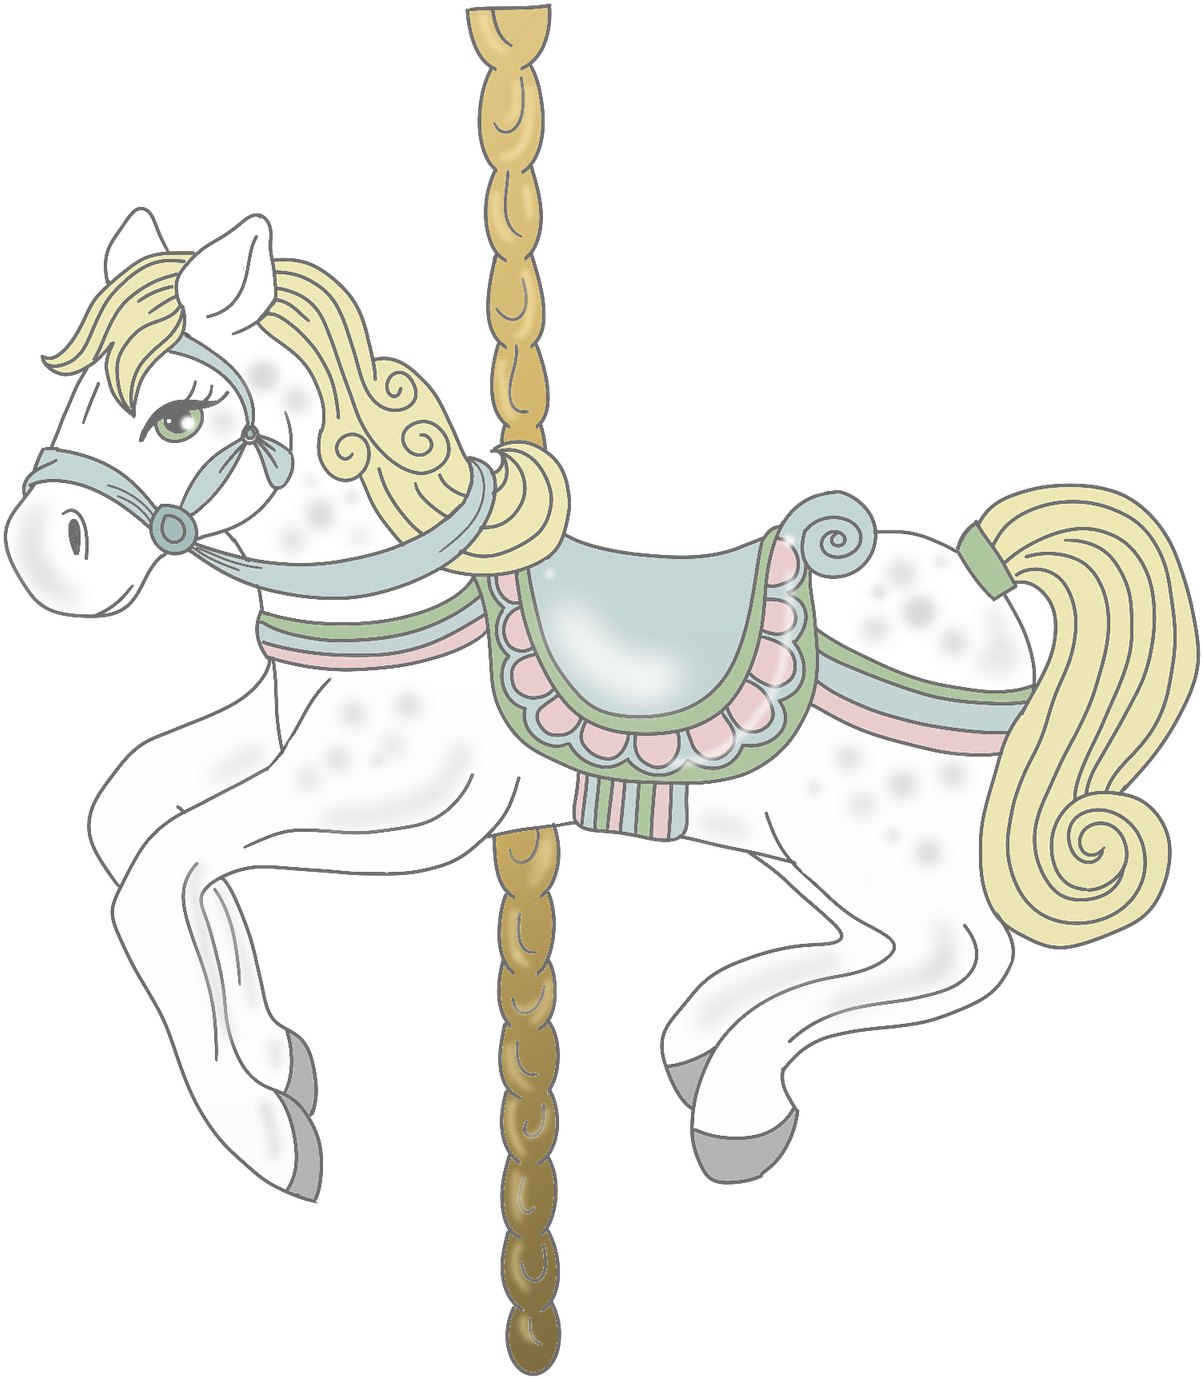 A White Horse On A Gold Chain